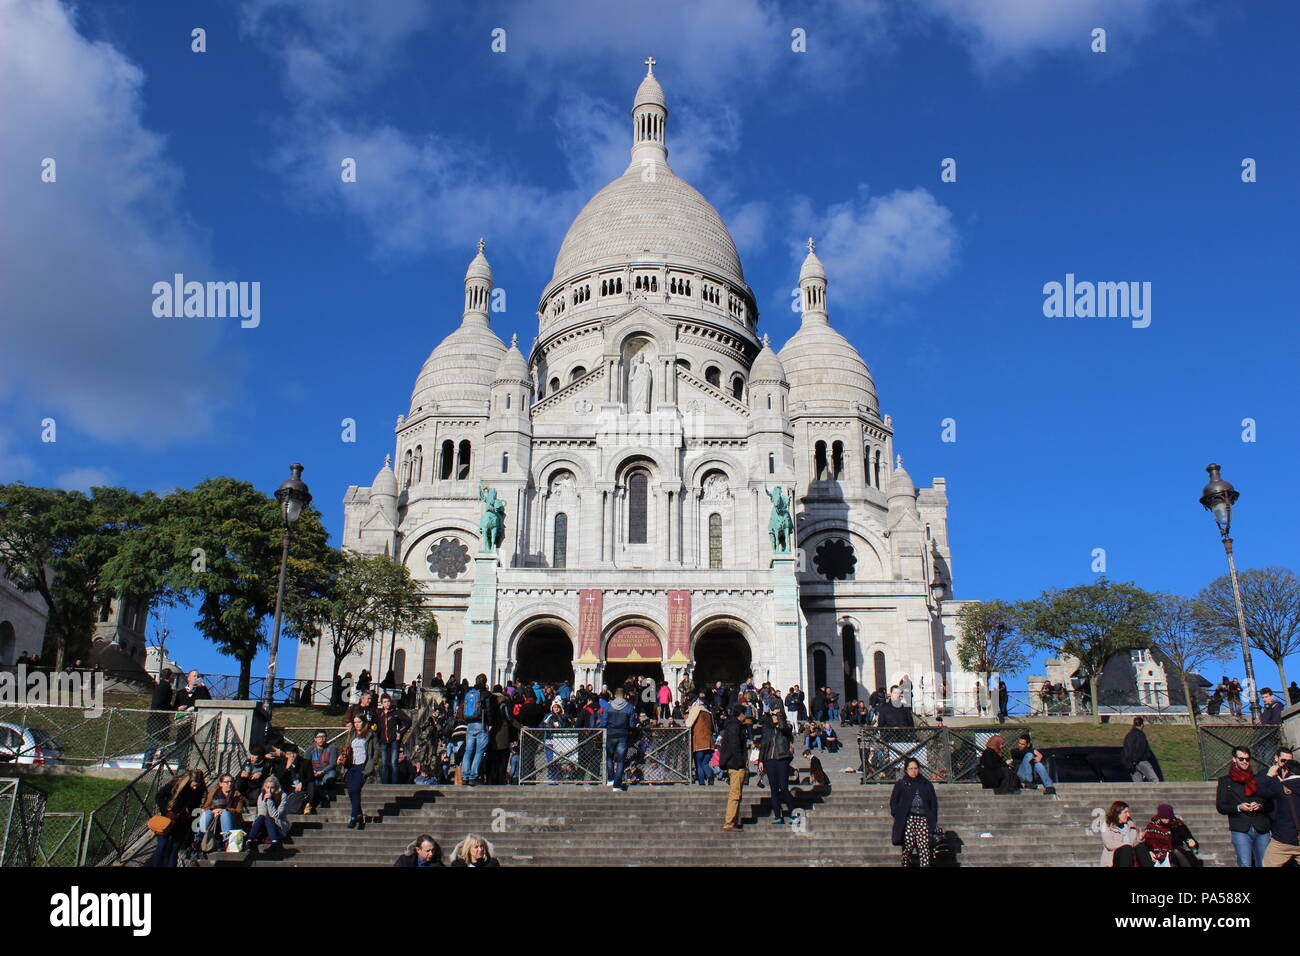 Lots of tourists come to see this beautiful Sacre Coeur Basilica and taking photos, having rest and enjoying mesmerizing view of Paris. Stock Photo